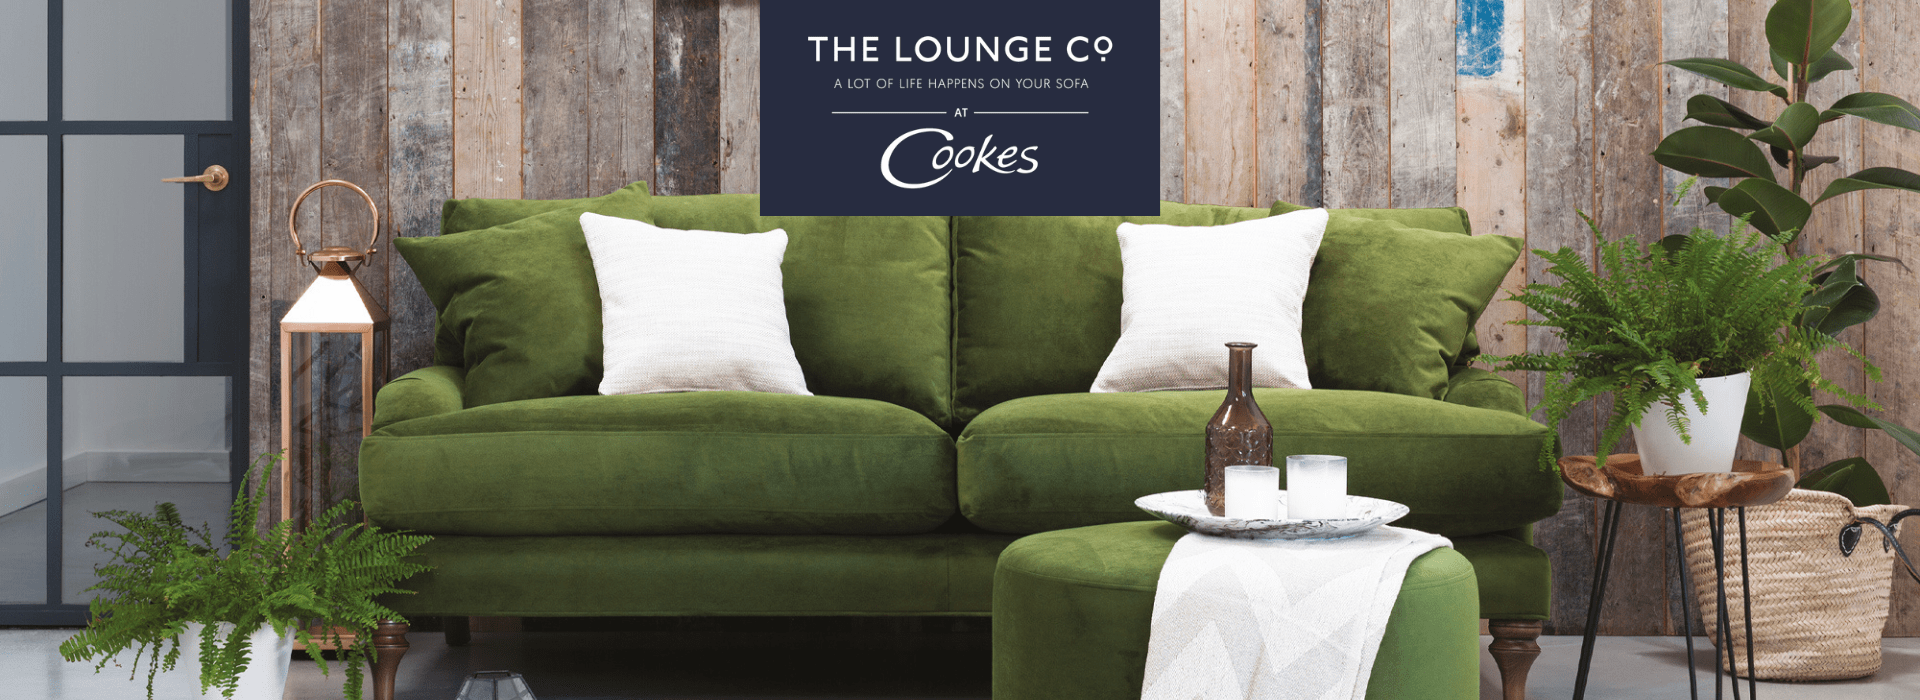 The Lounge Co rose Landing Page Banner 